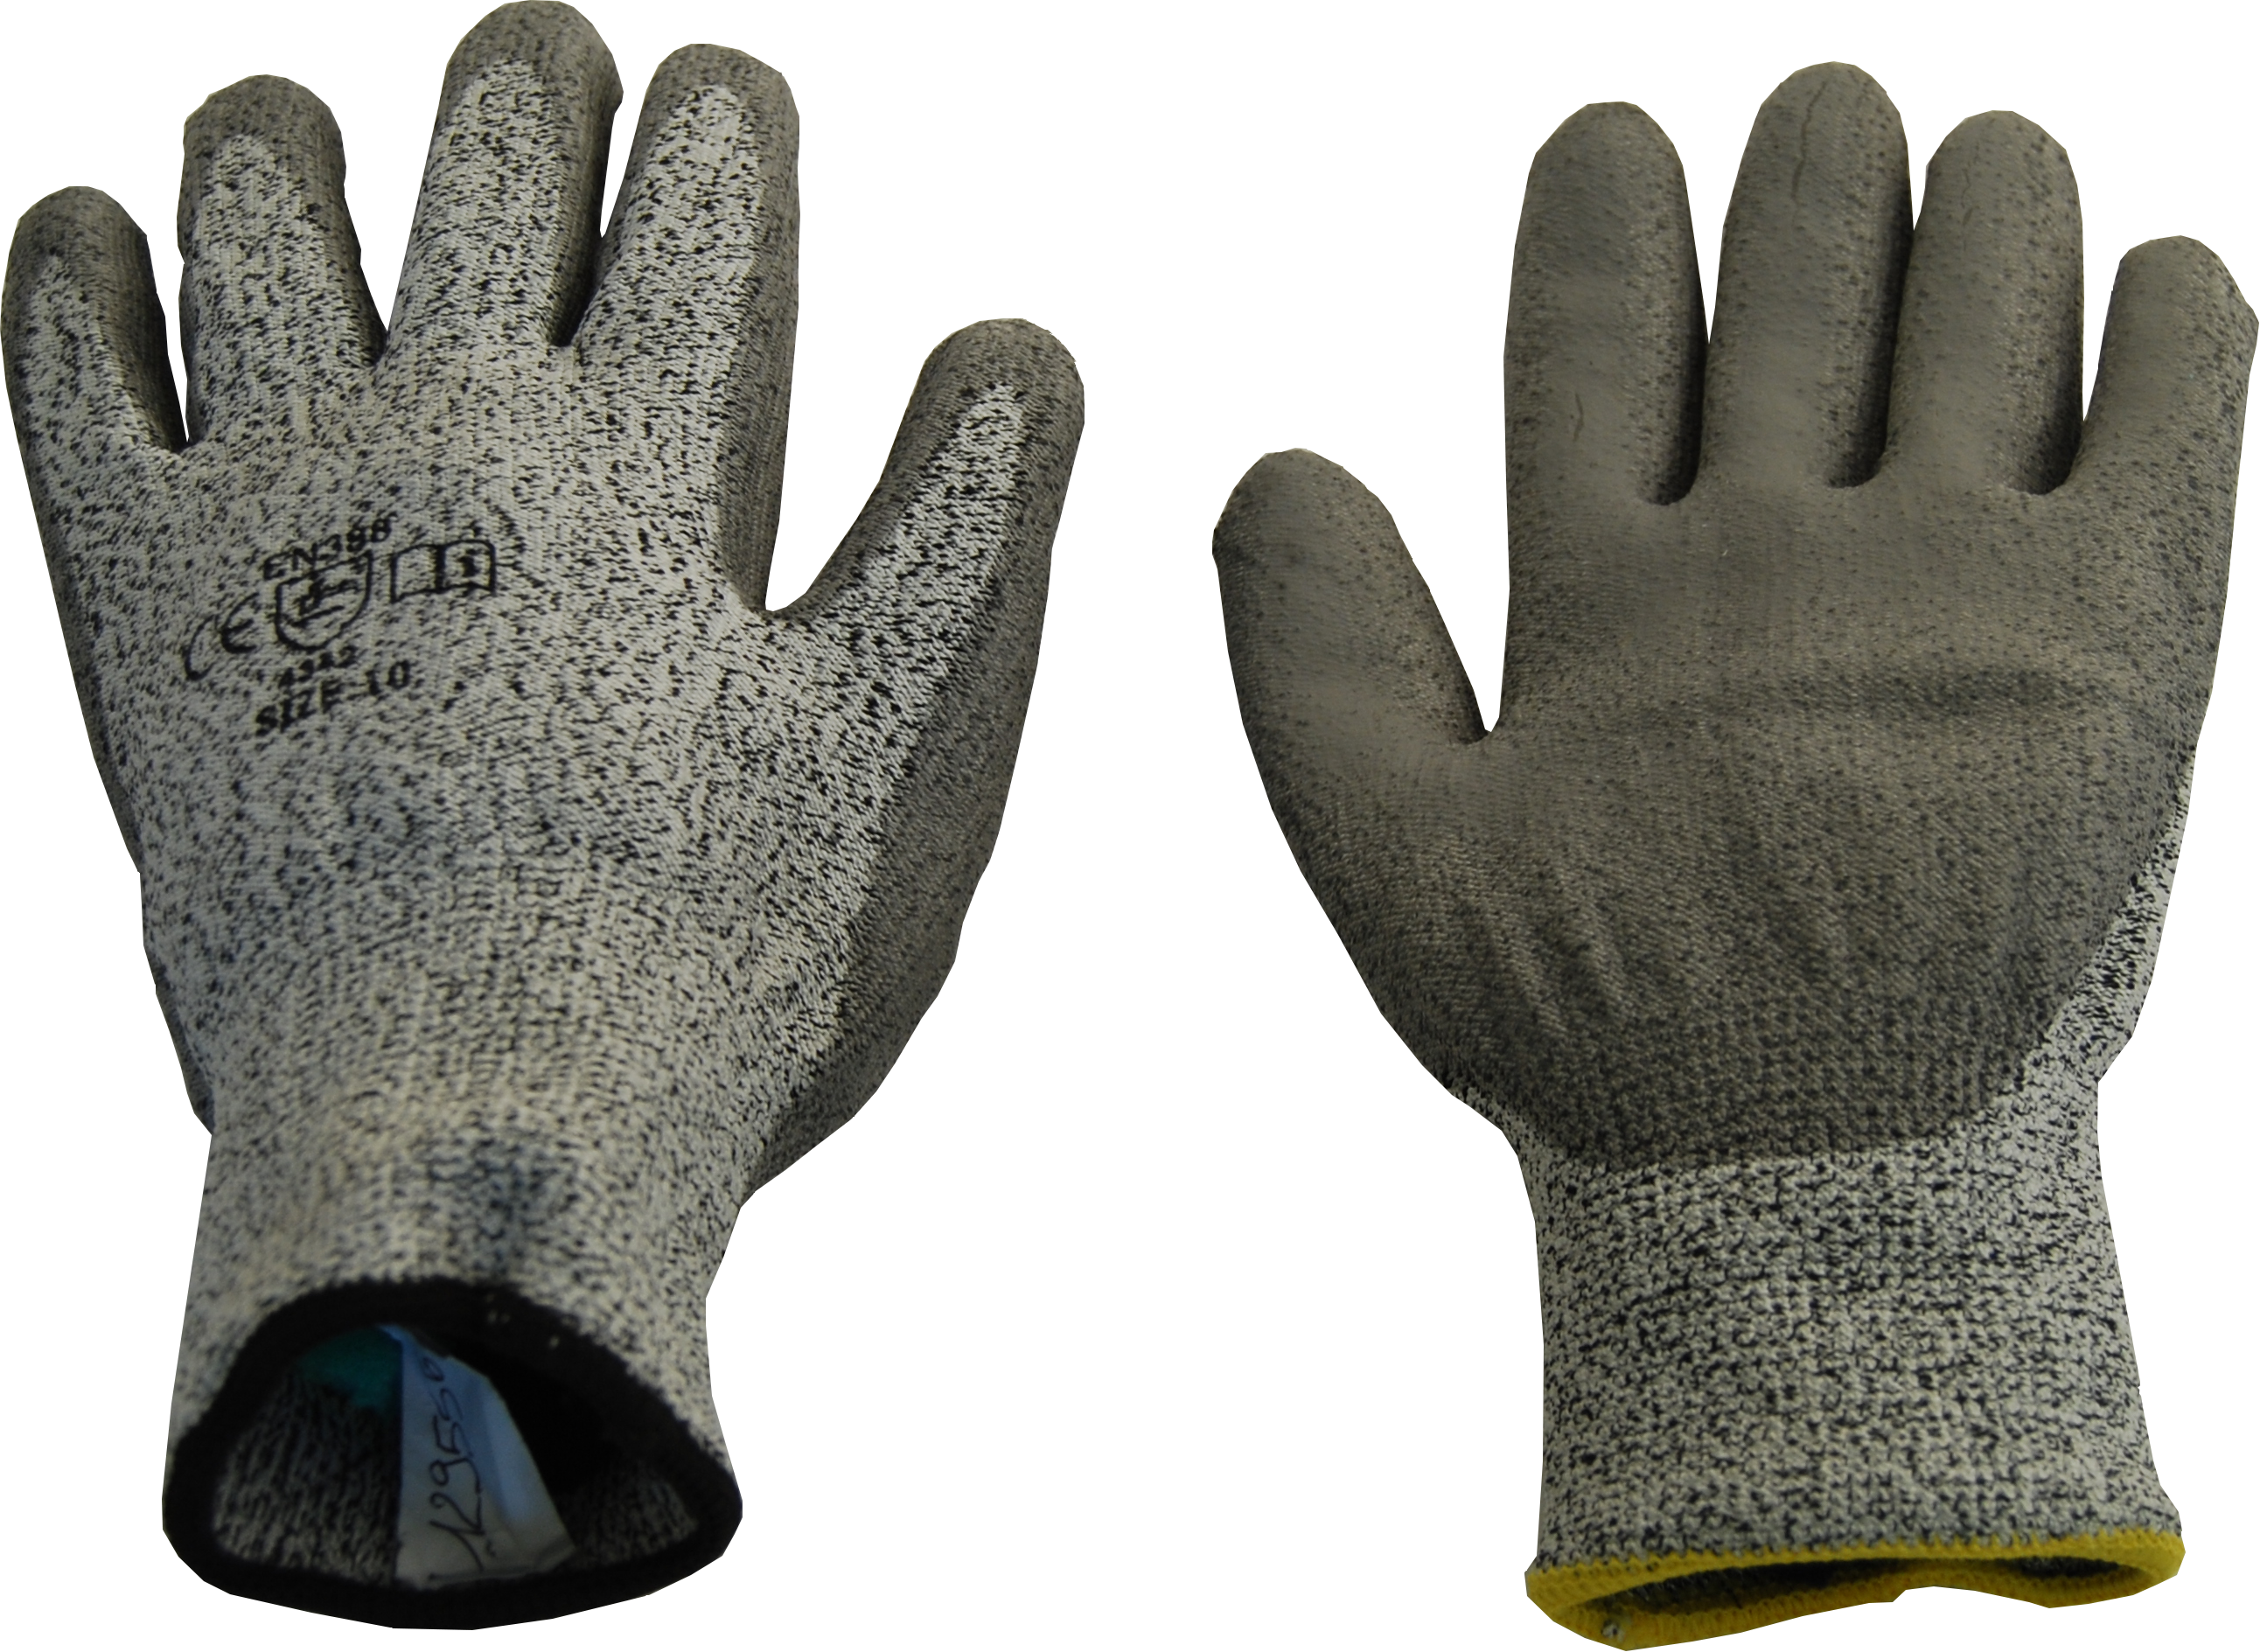 Le gant collant . Goggles clipart safety glove